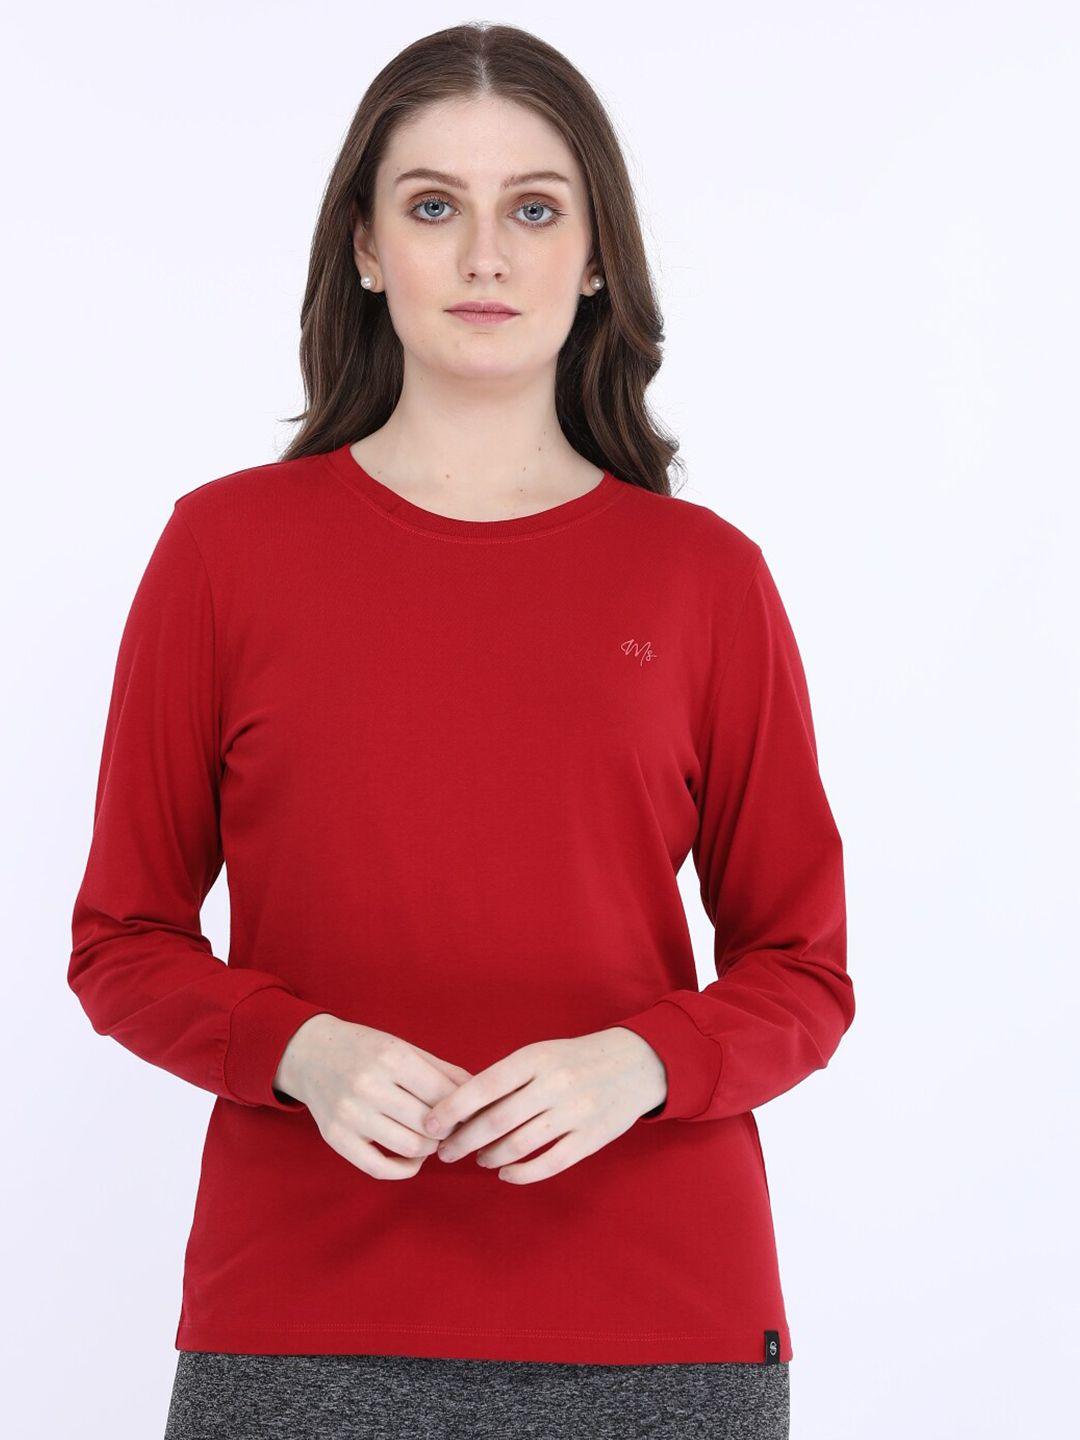 maysixty women red pure cotton t-shirt